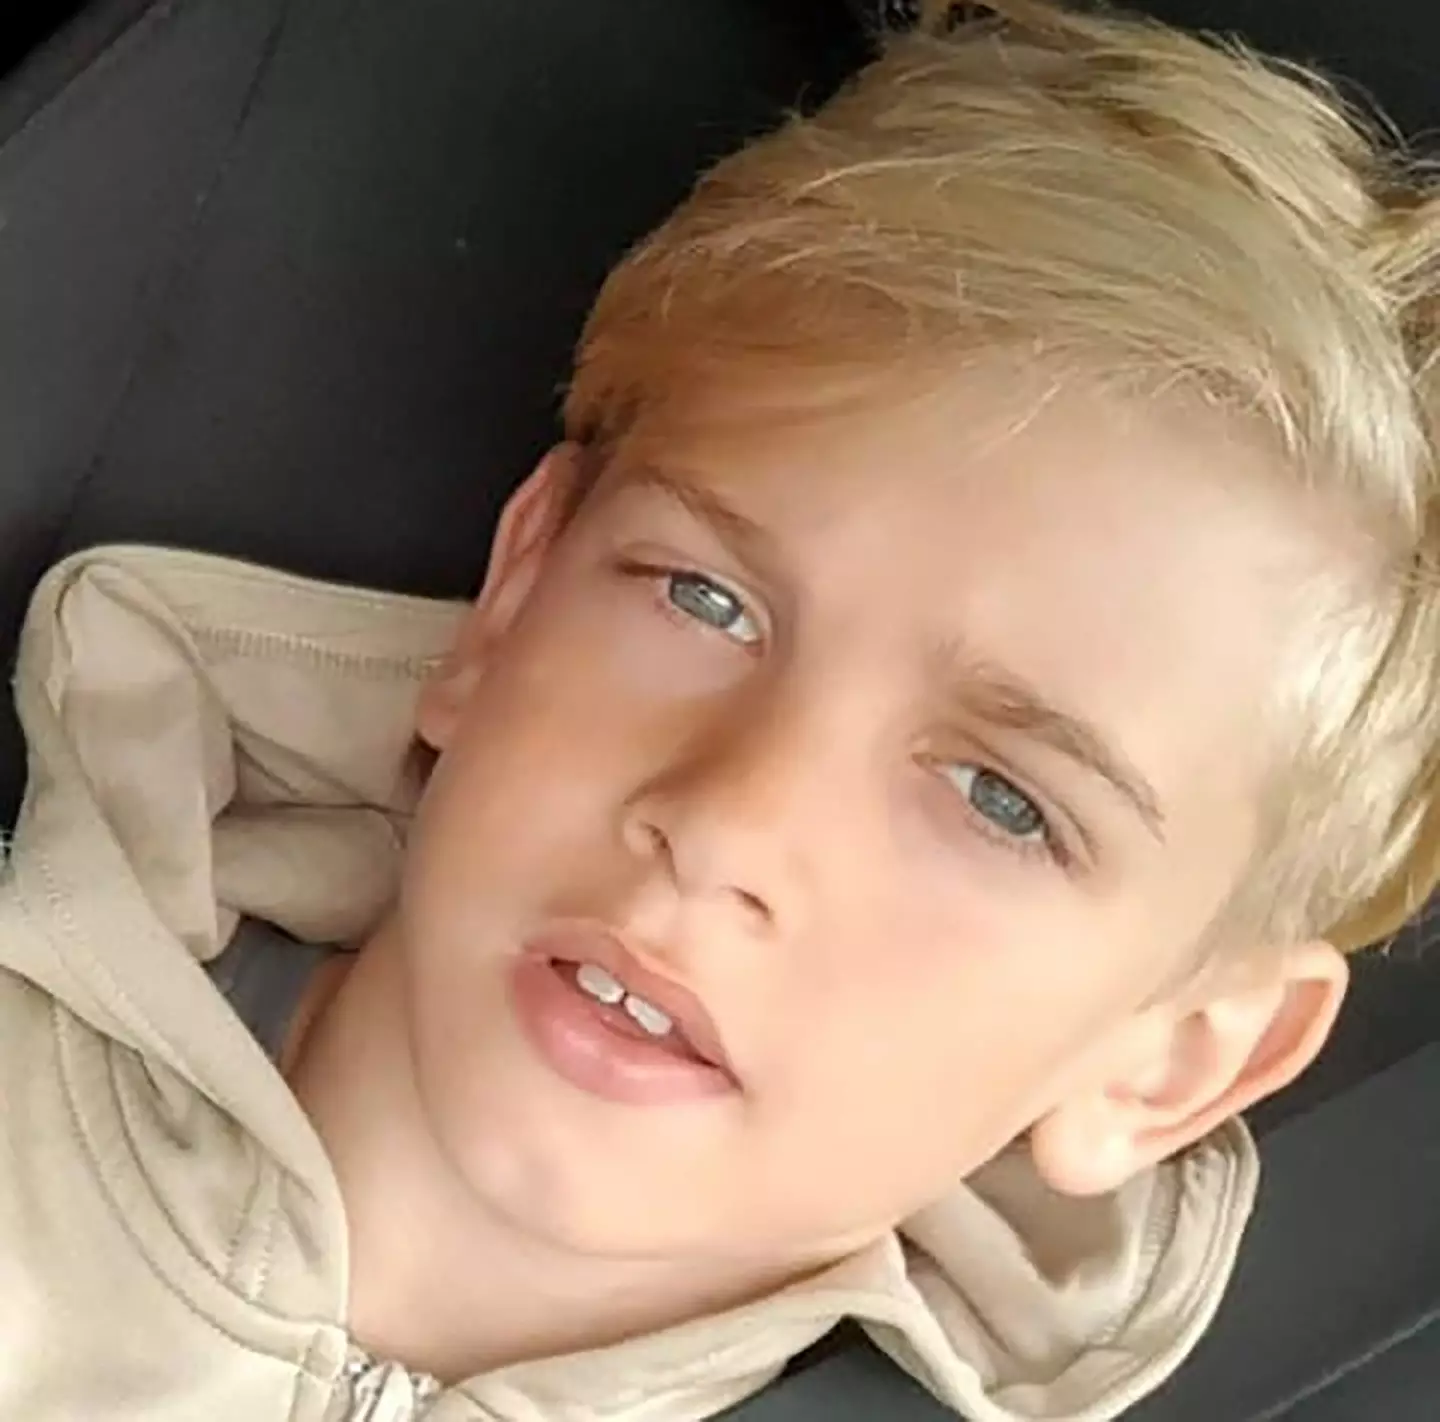 12-year-old Archie Battersbee passed away on 6 August after his life support was turned off.